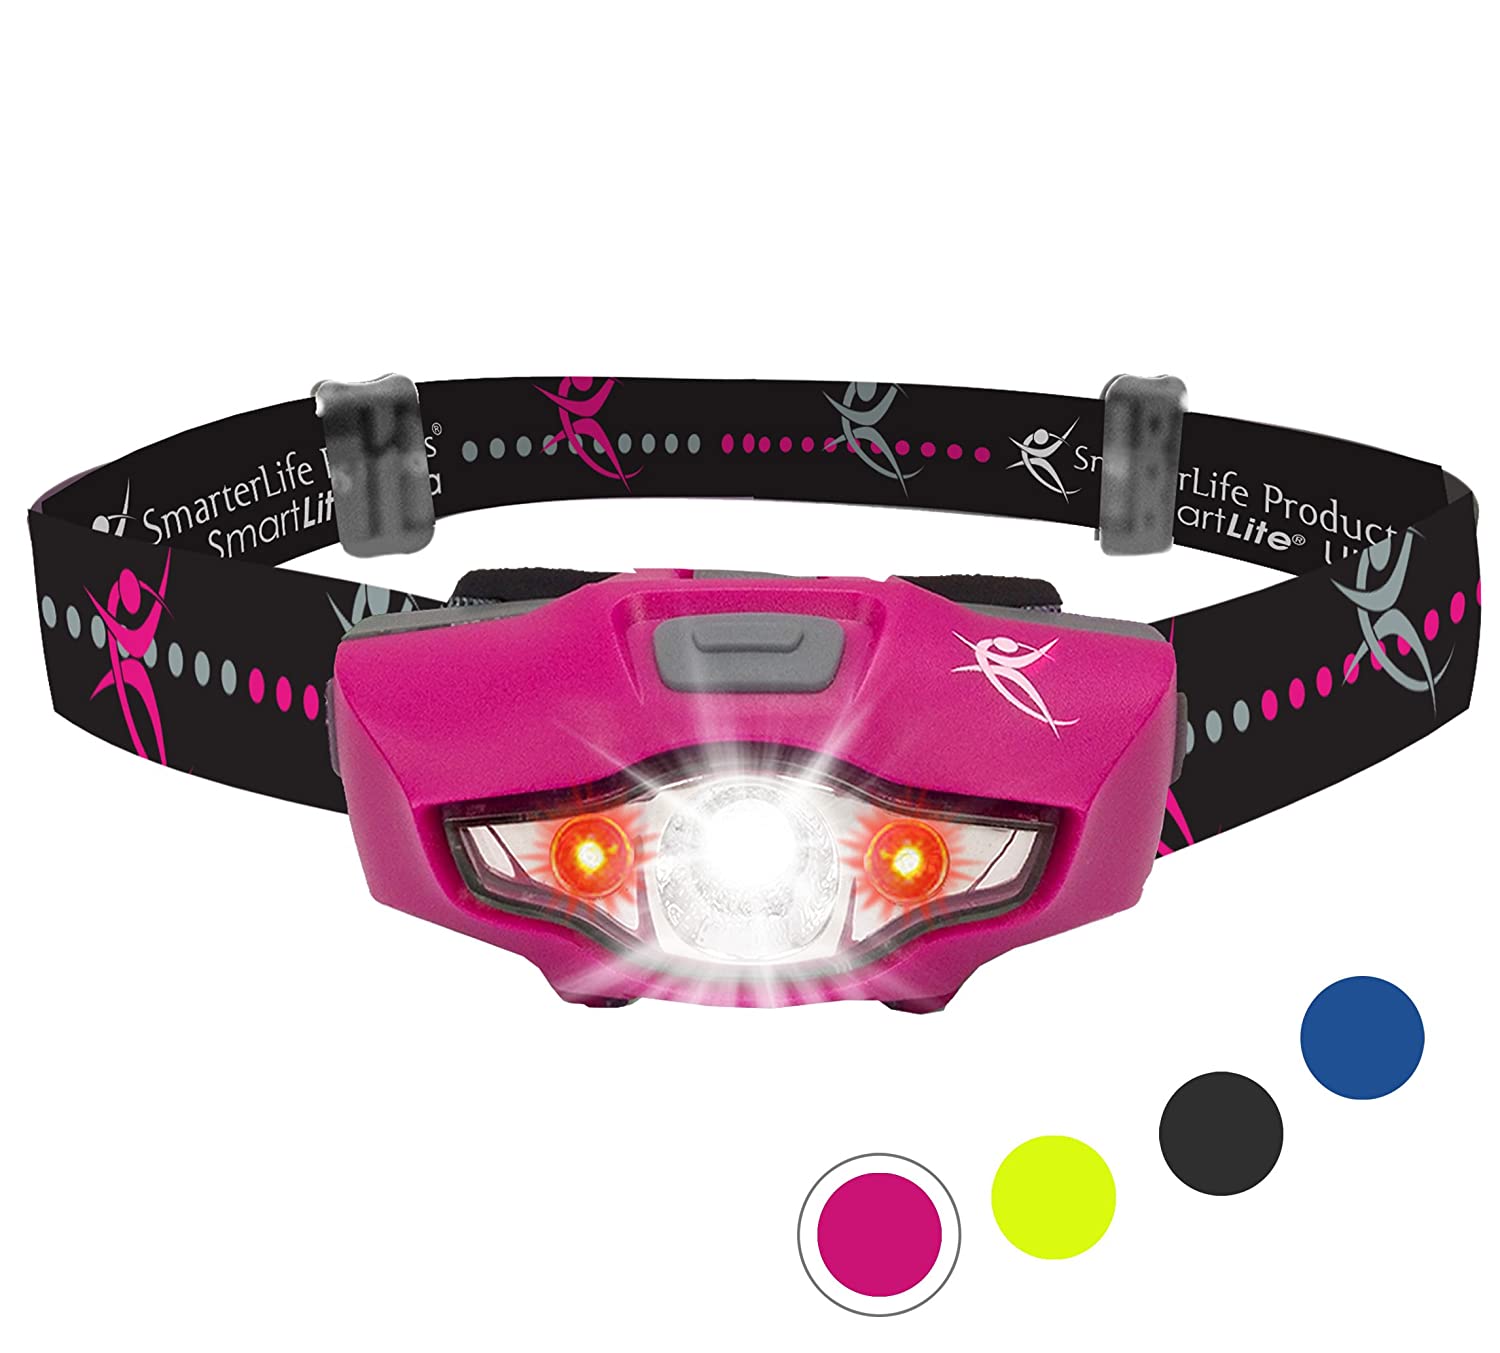 LED Headlamp Flashlight - 6 White and Red LED Head Lamp Modes - 1 Battery, Lightweight, IPX6 Waterproof